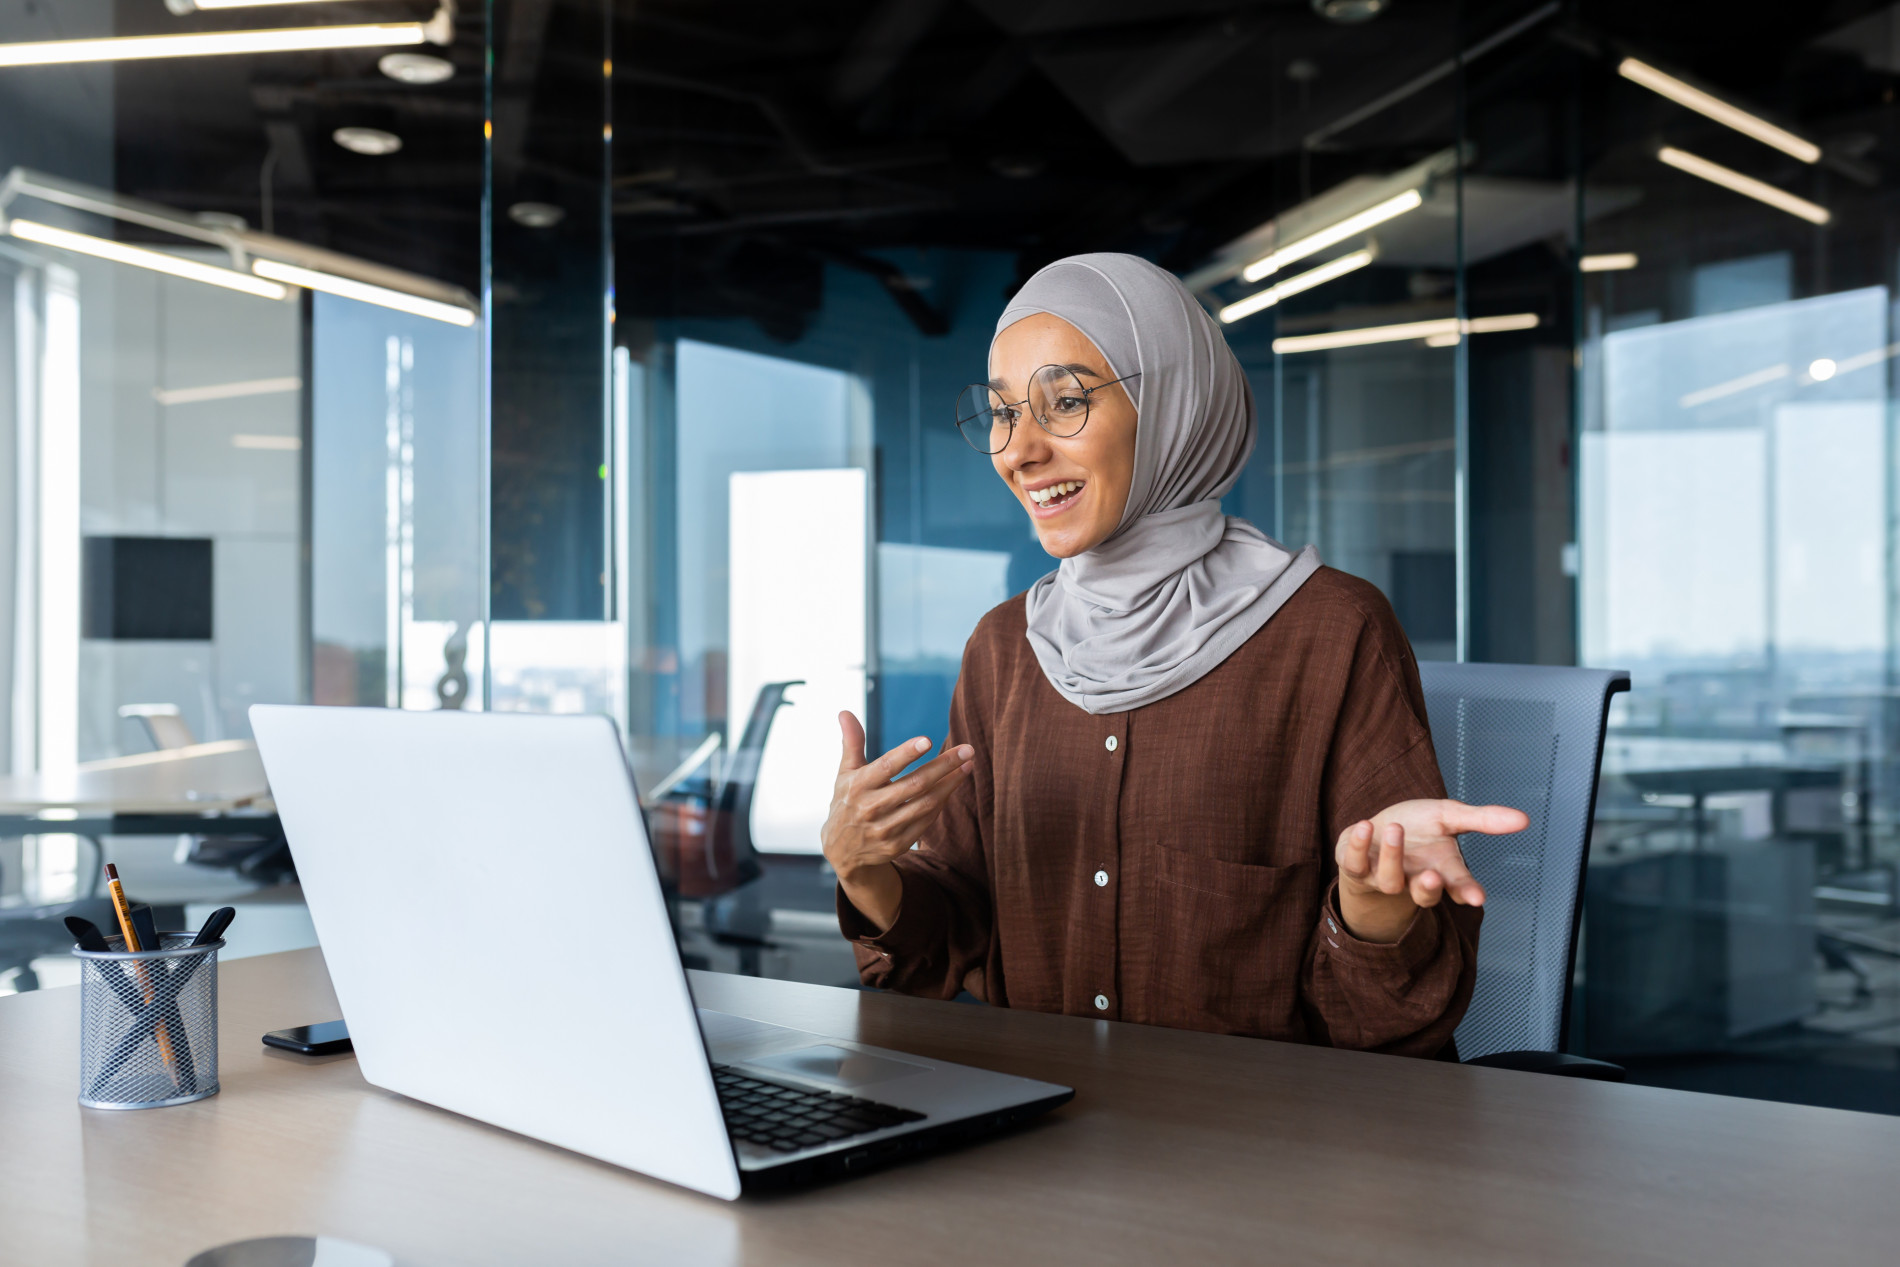 A woman wearing glasses and a hijab is sitting in front of a laptop. She is in an office environment. She is mid conversation, which suggests she is on a video call. 